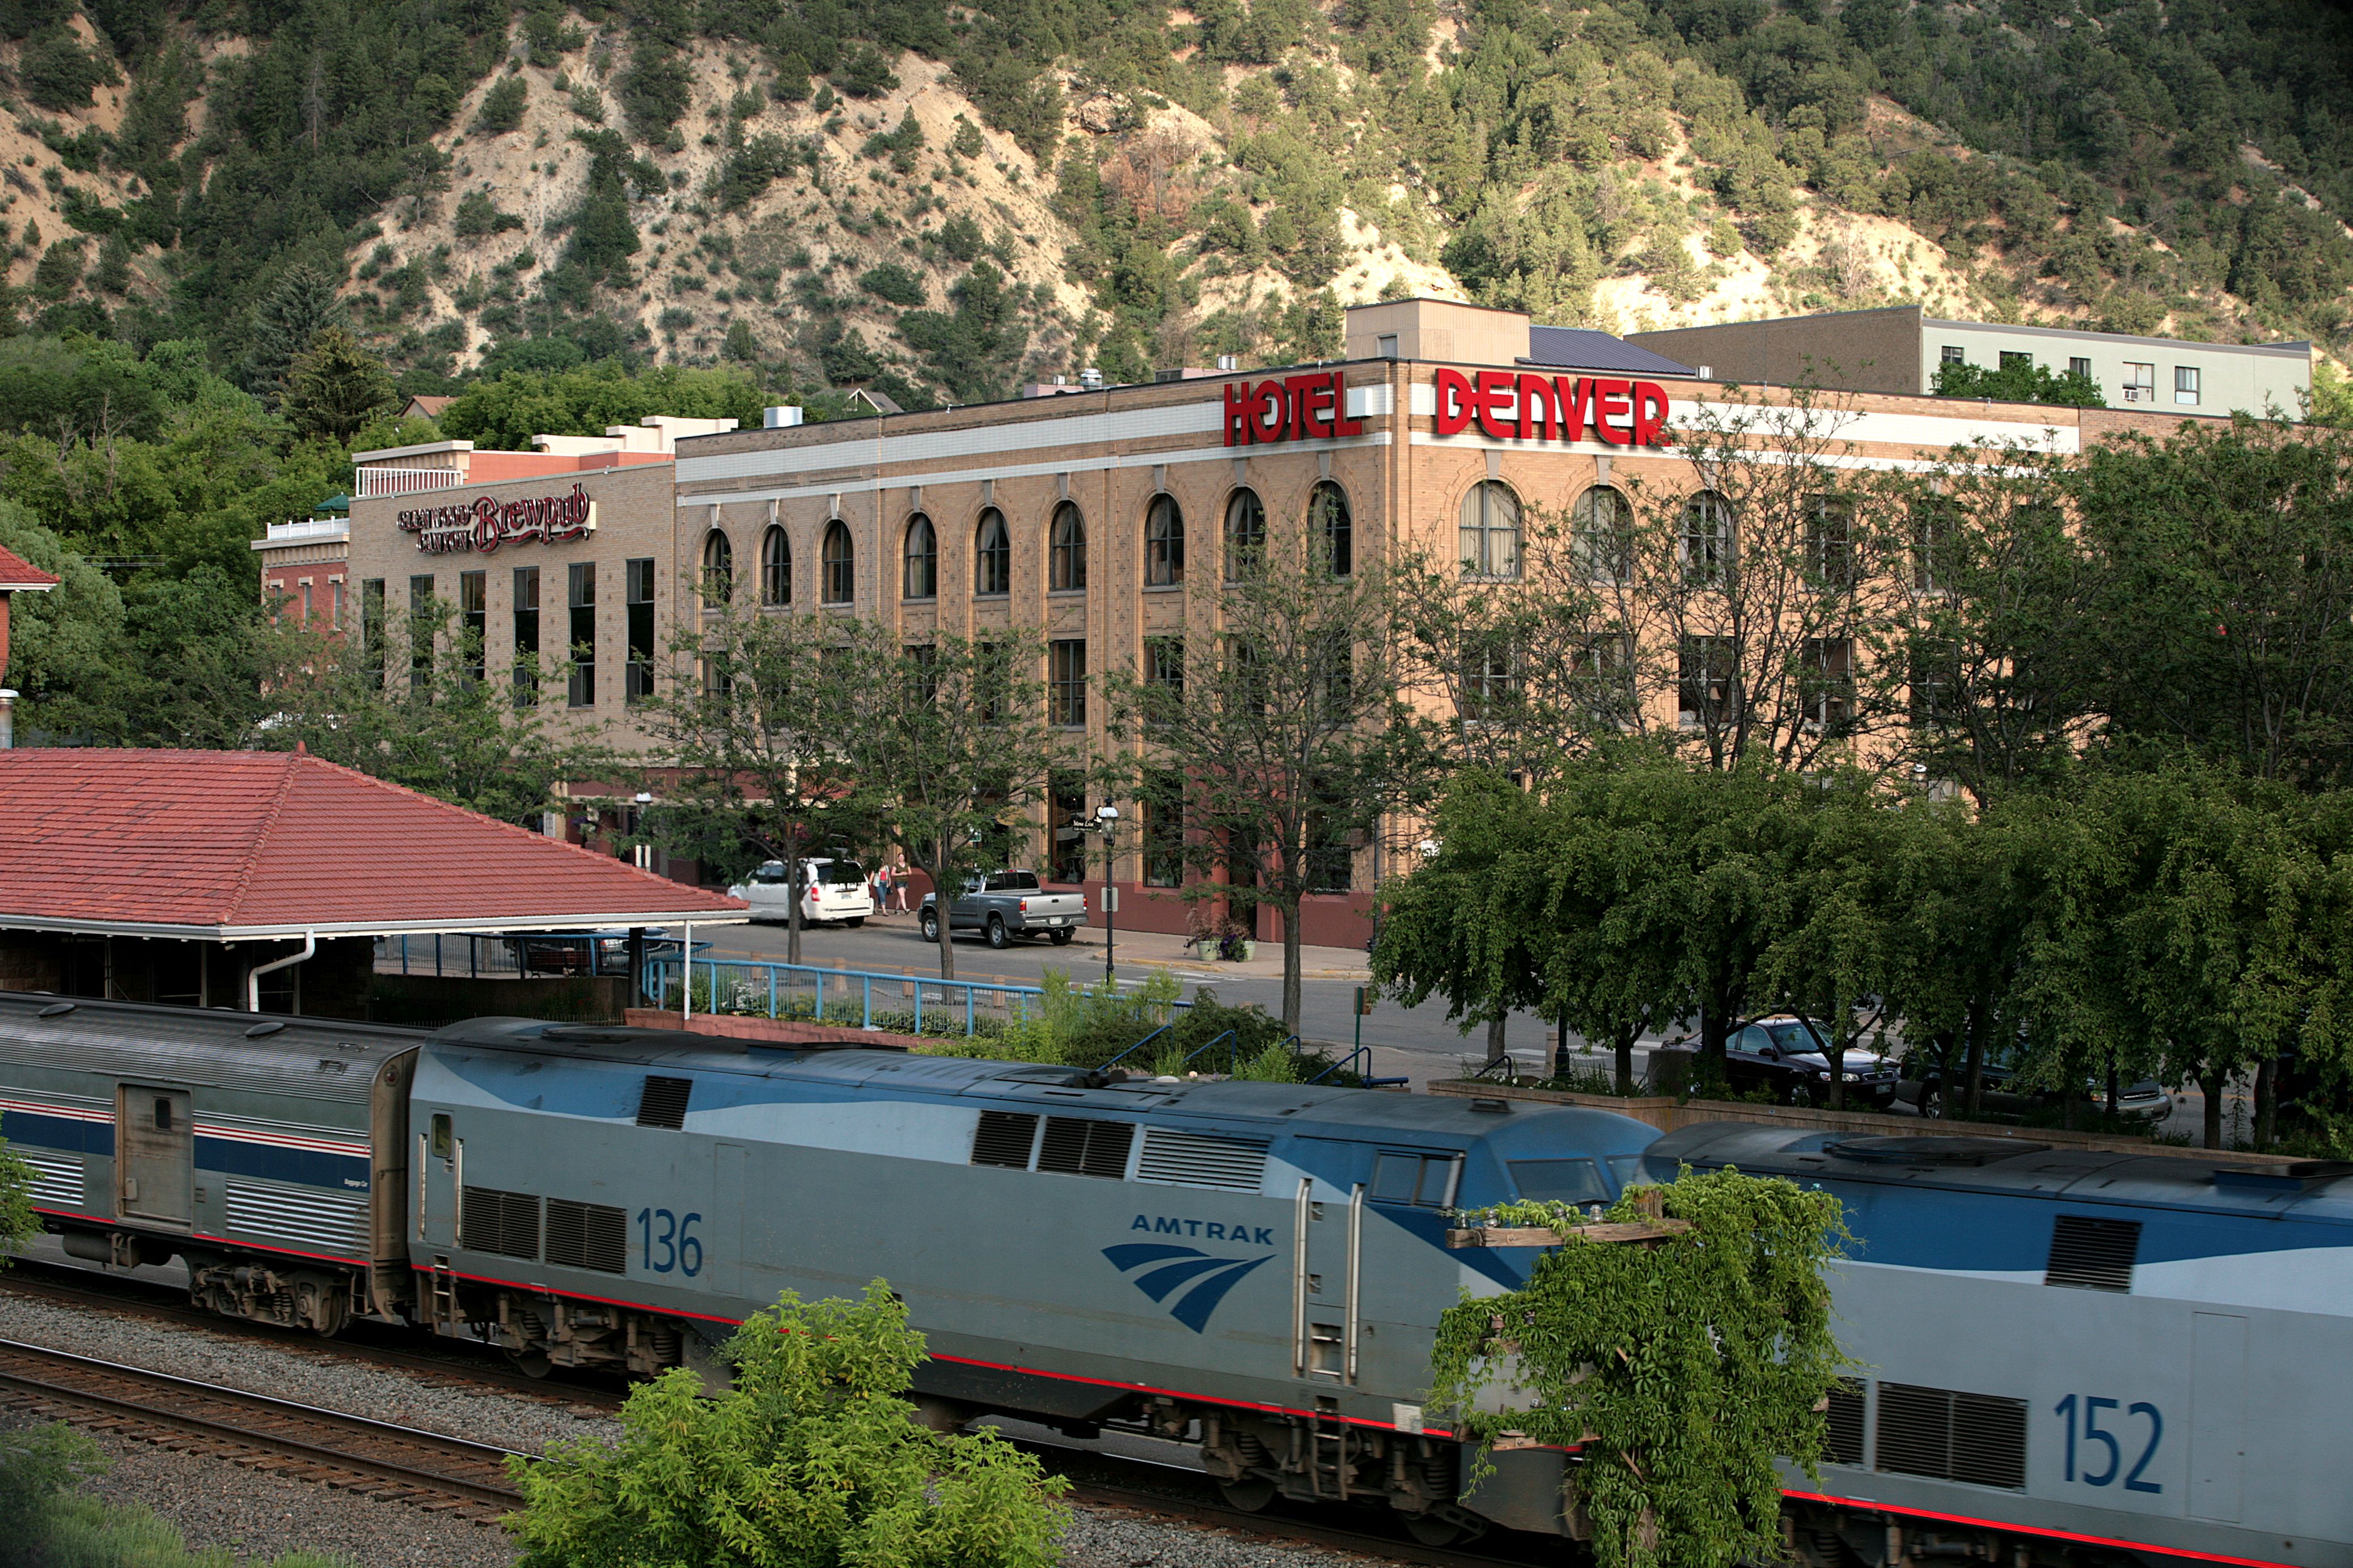 The Hotel Denver serves train passengers and tourists in Glenwood Springs, as it has since 1915.